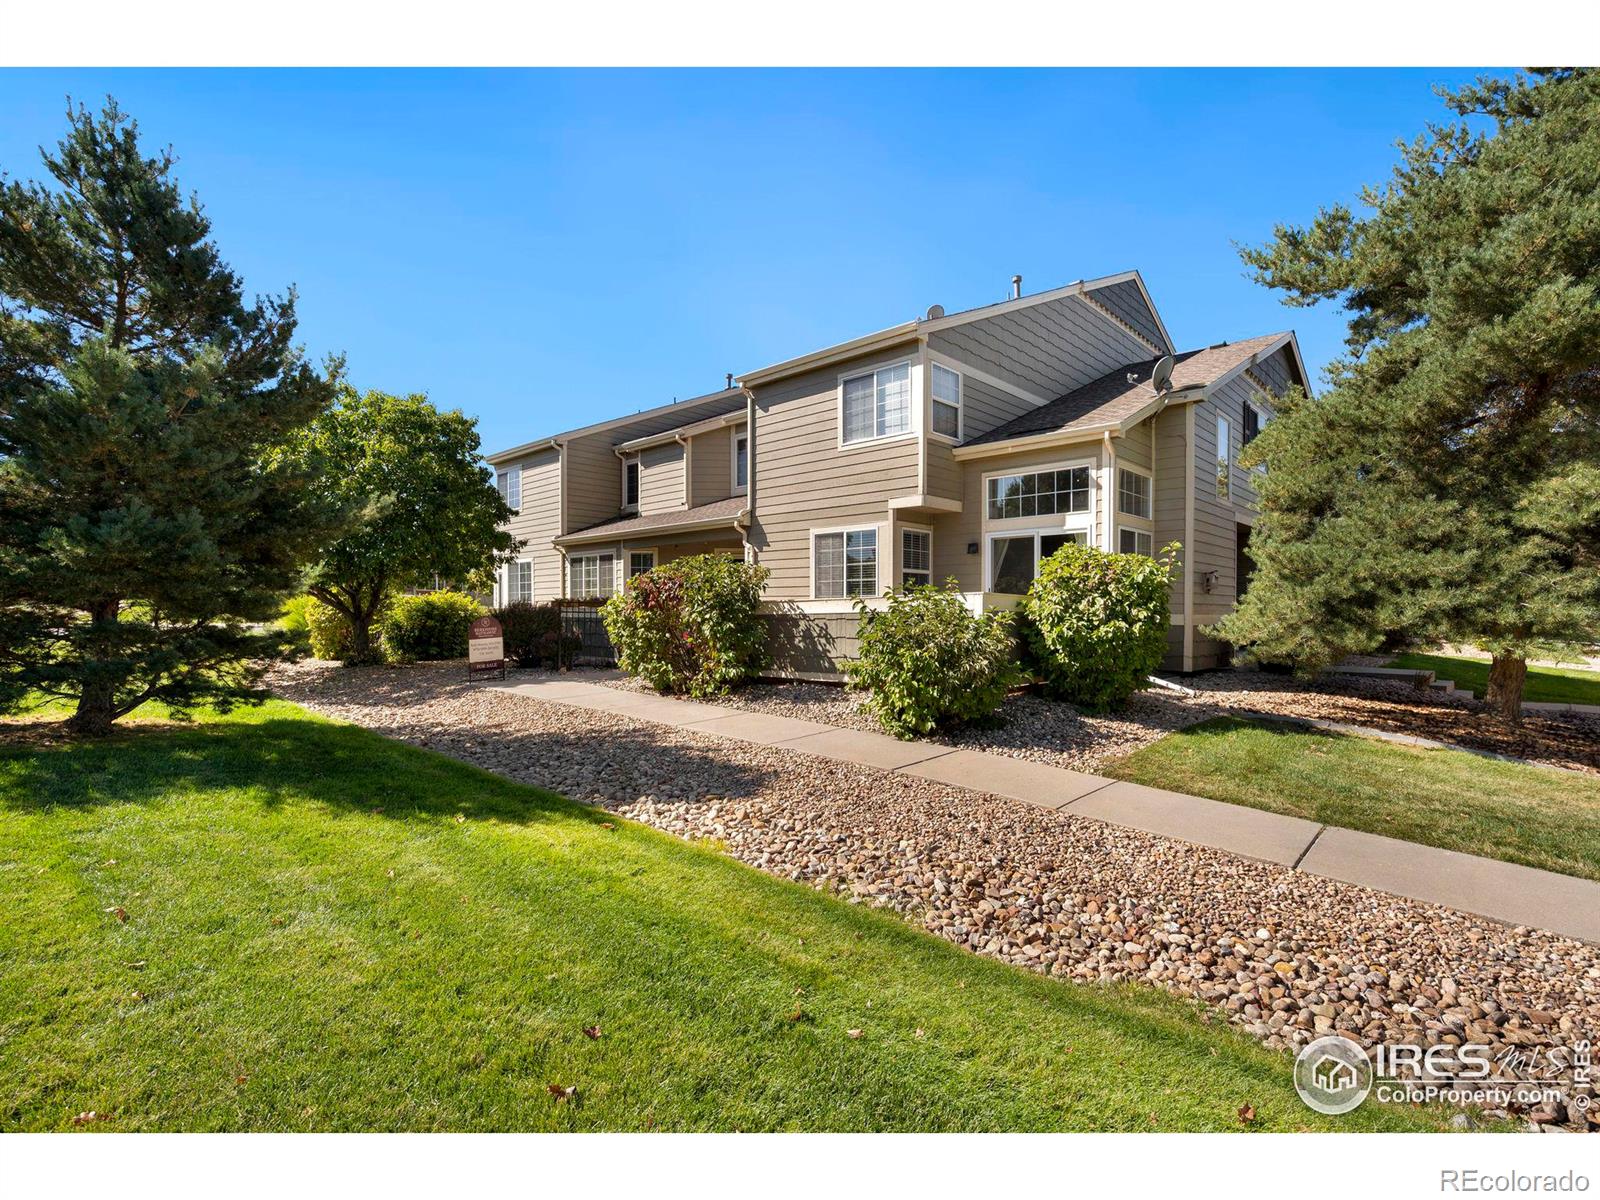 6832  antigua drive, Fort Collins sold home. Closed on 2023-12-18 for $385,000.